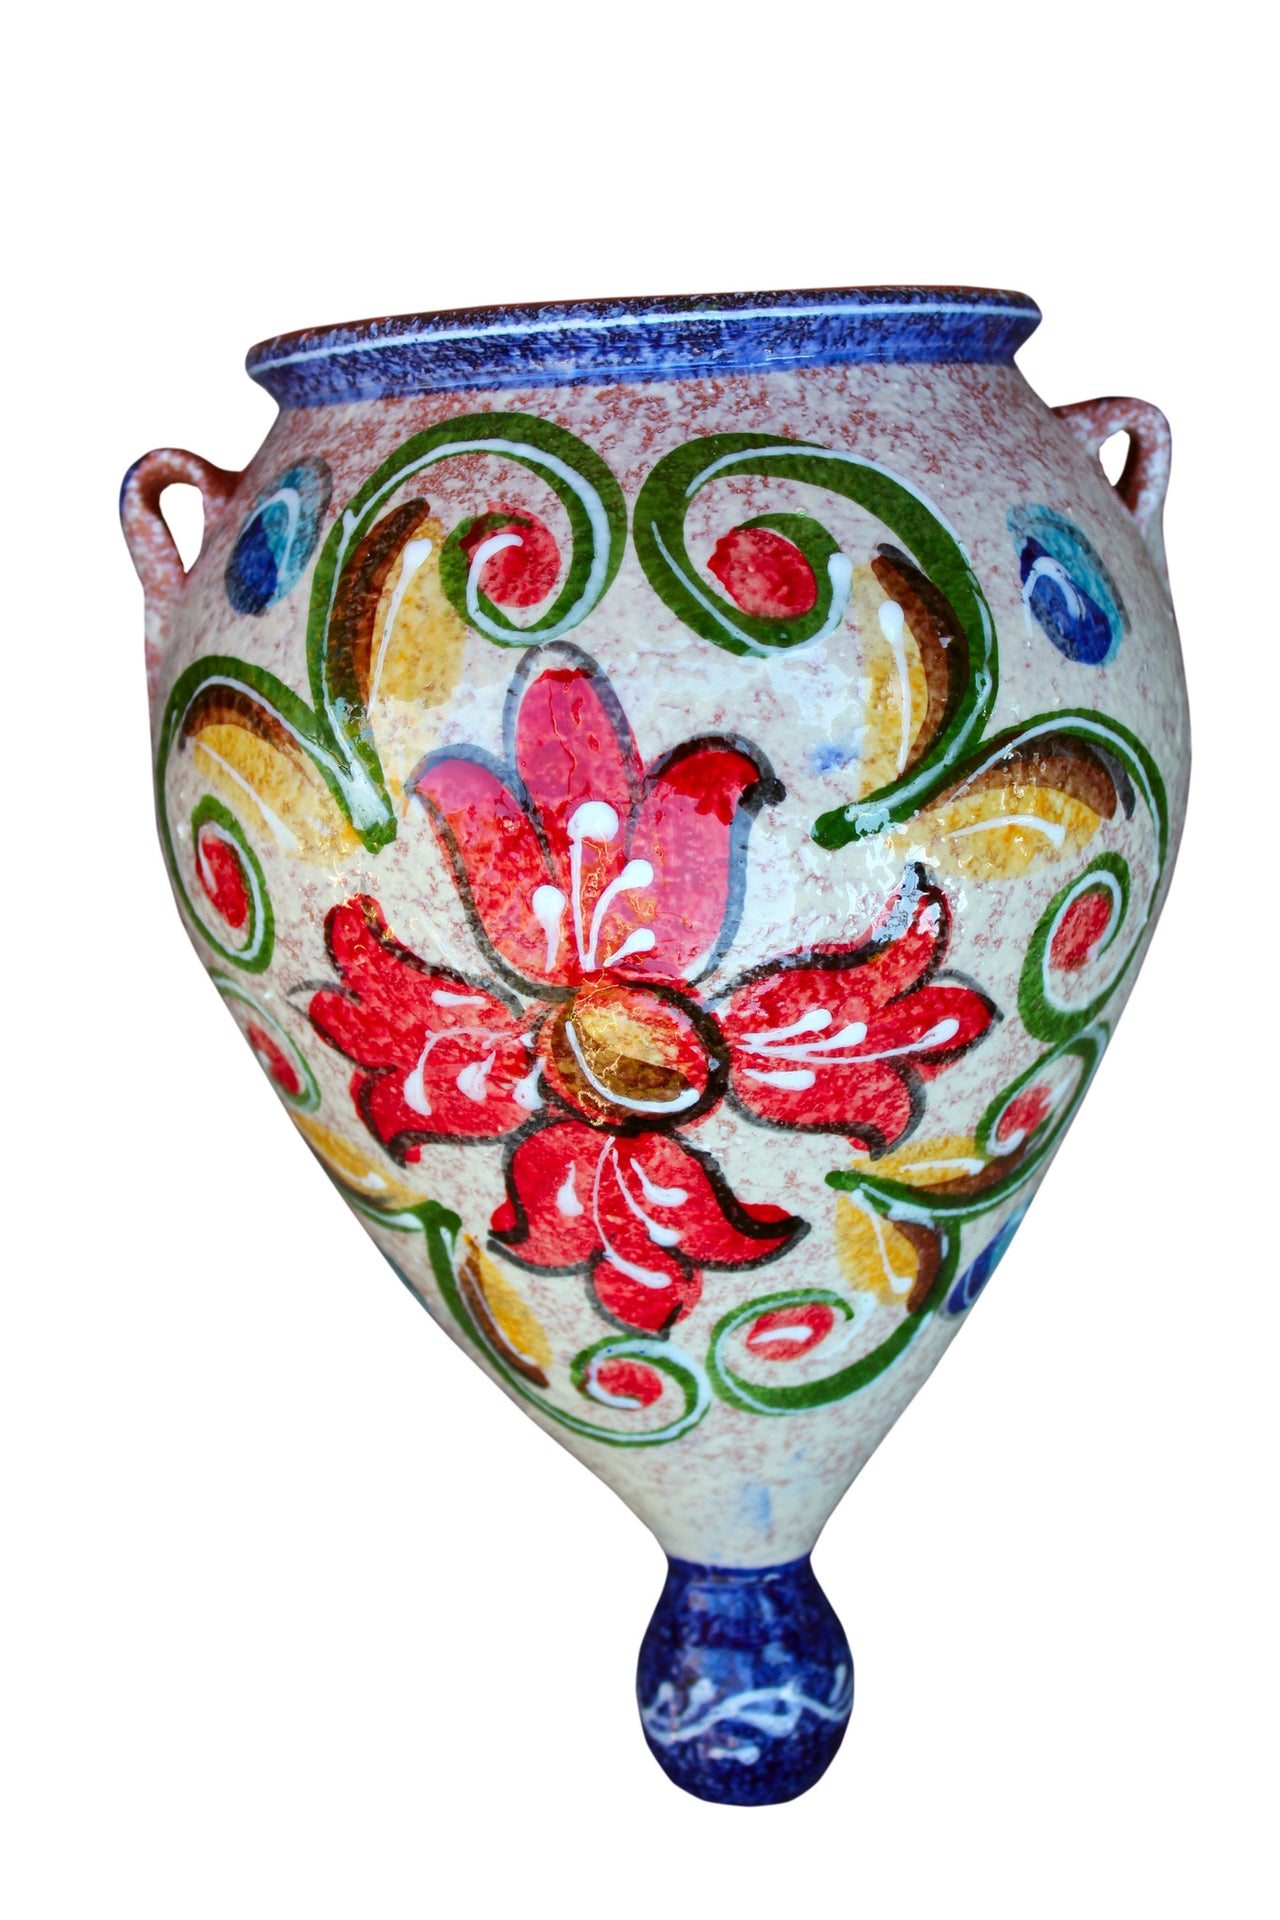 Wall Planter - Spanish Orza (Blue Treasure) - Hand Painted in Spain